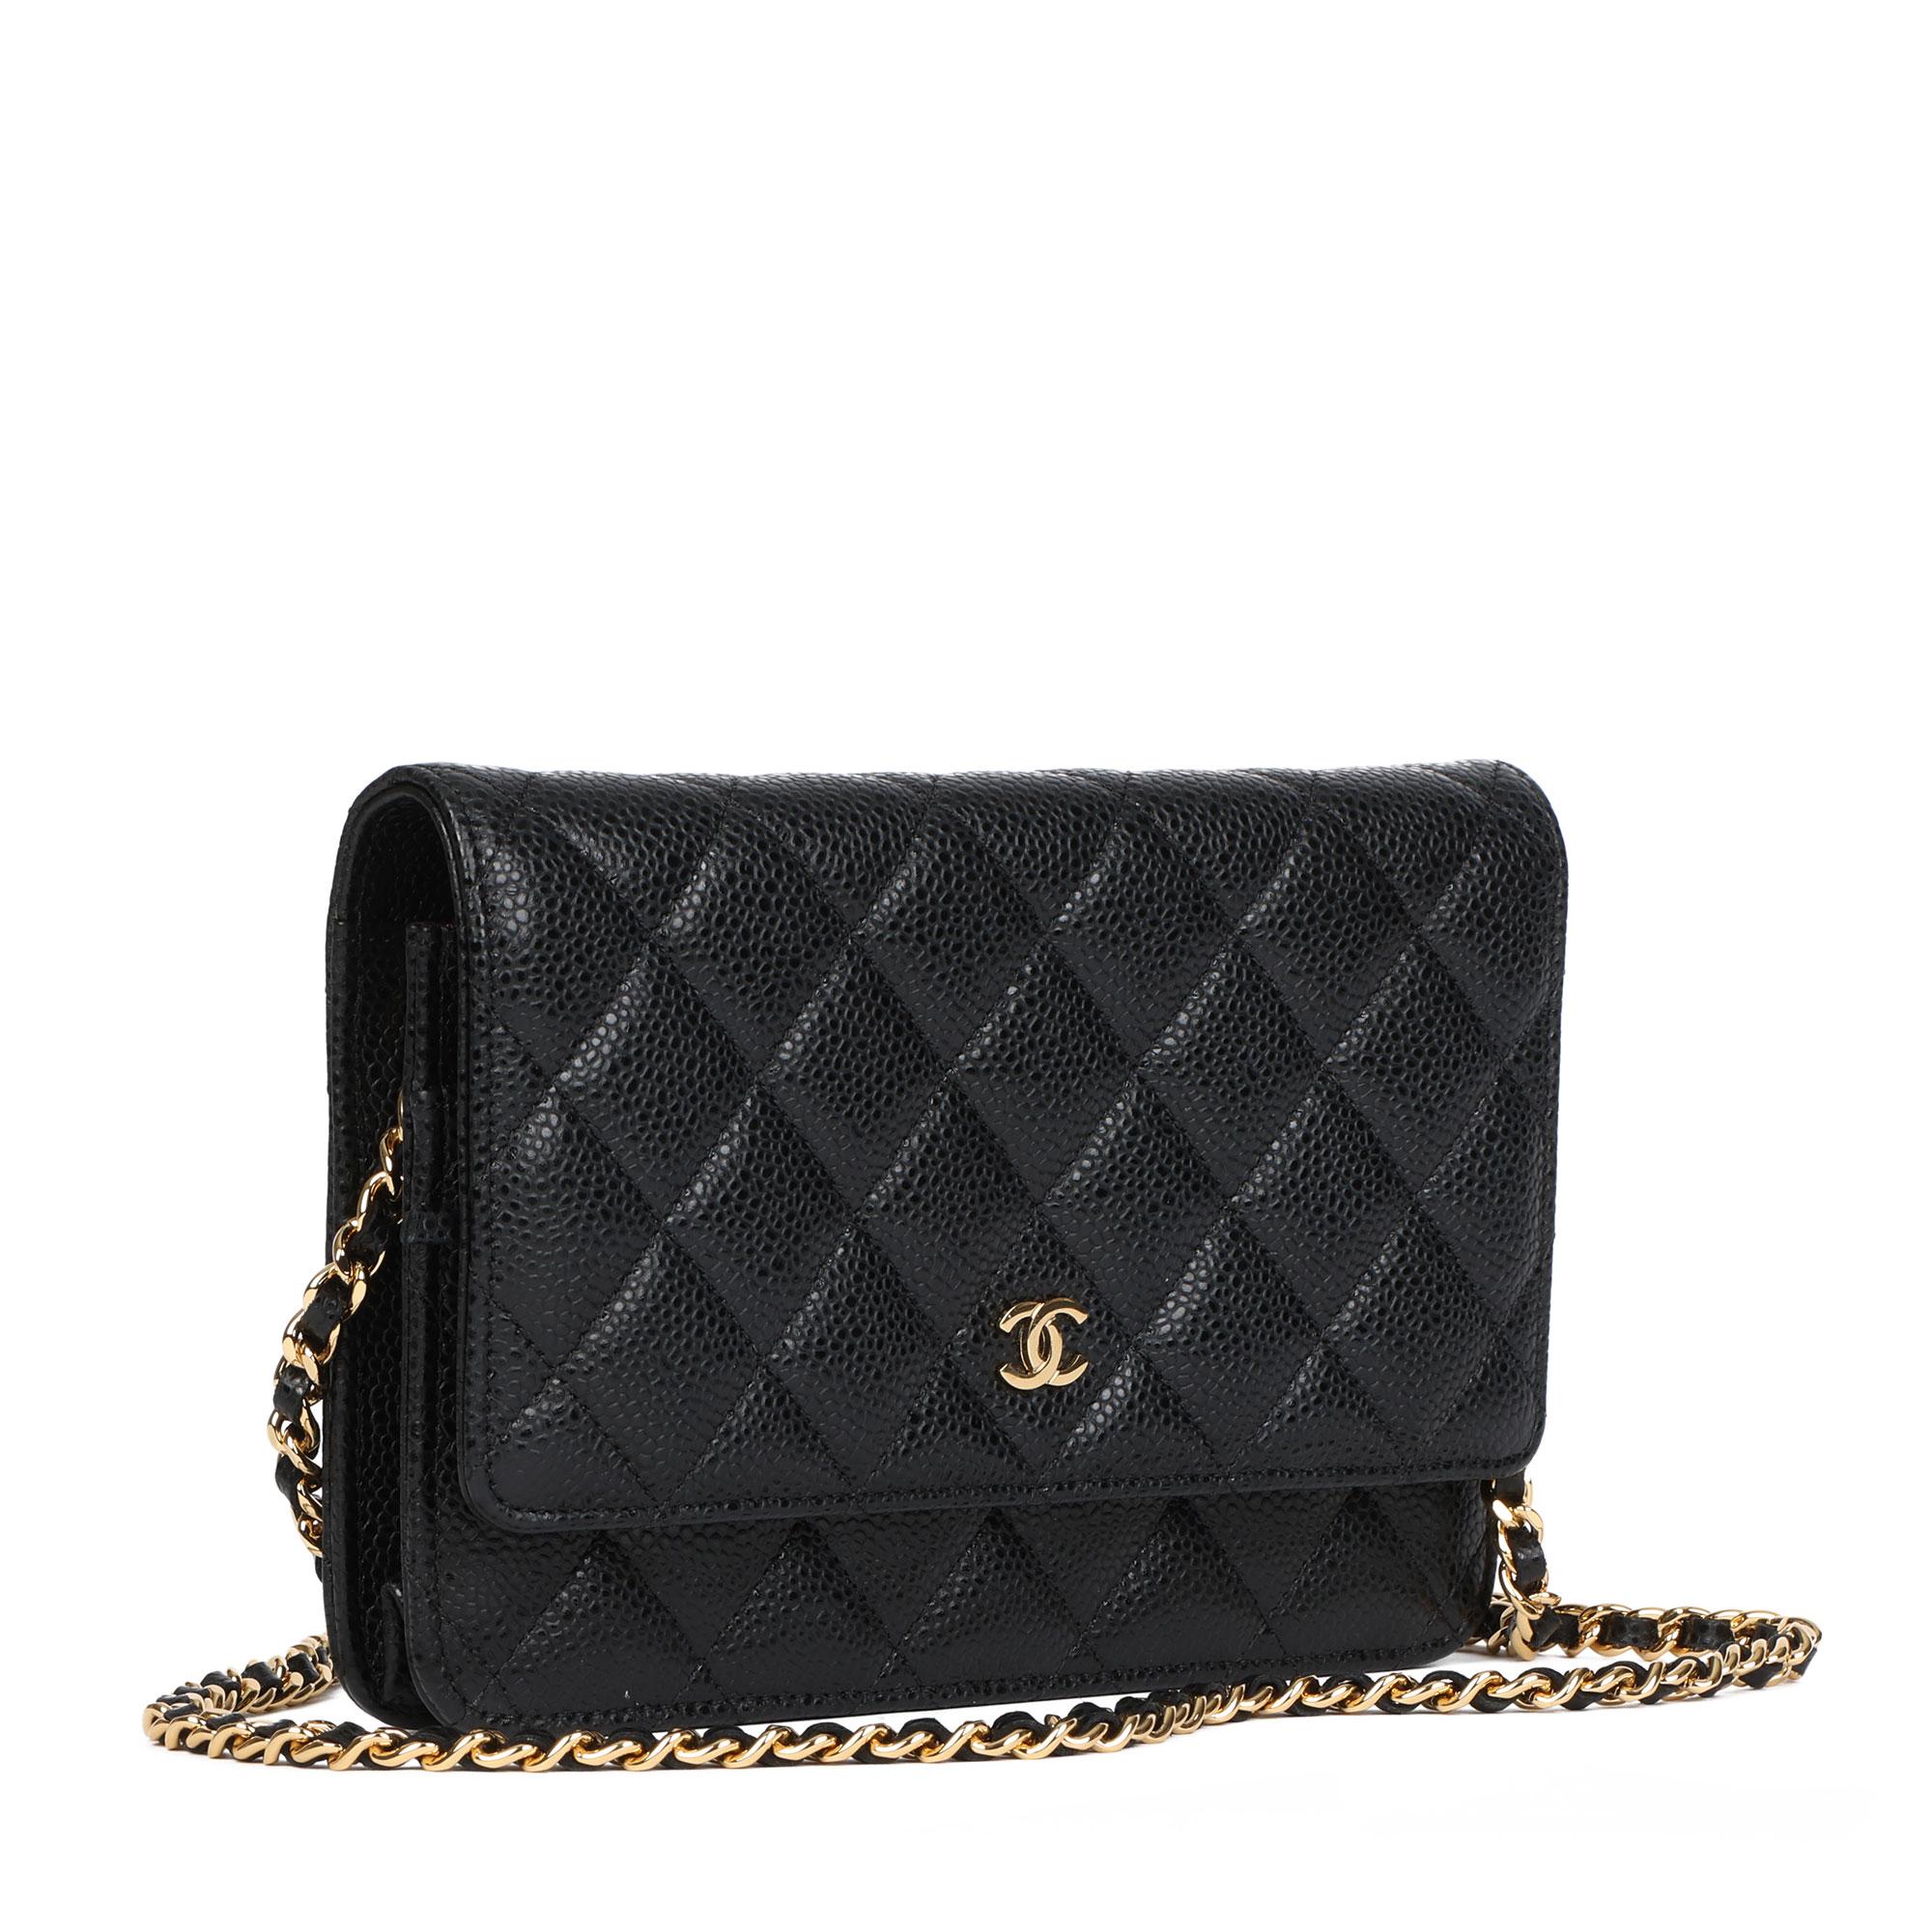 CHANEL
Black Quilted Caviar Leather Wallet-on-Chain WOC

Xupes Reference: CB443
Serial Number: 26899648
Age (Circa): 2019
Accompanied By: Chanel Dust Bag, Box, Authenticity Card, Tag
Authenticity Details: Authenticity Card, Serial Sticker (Made in